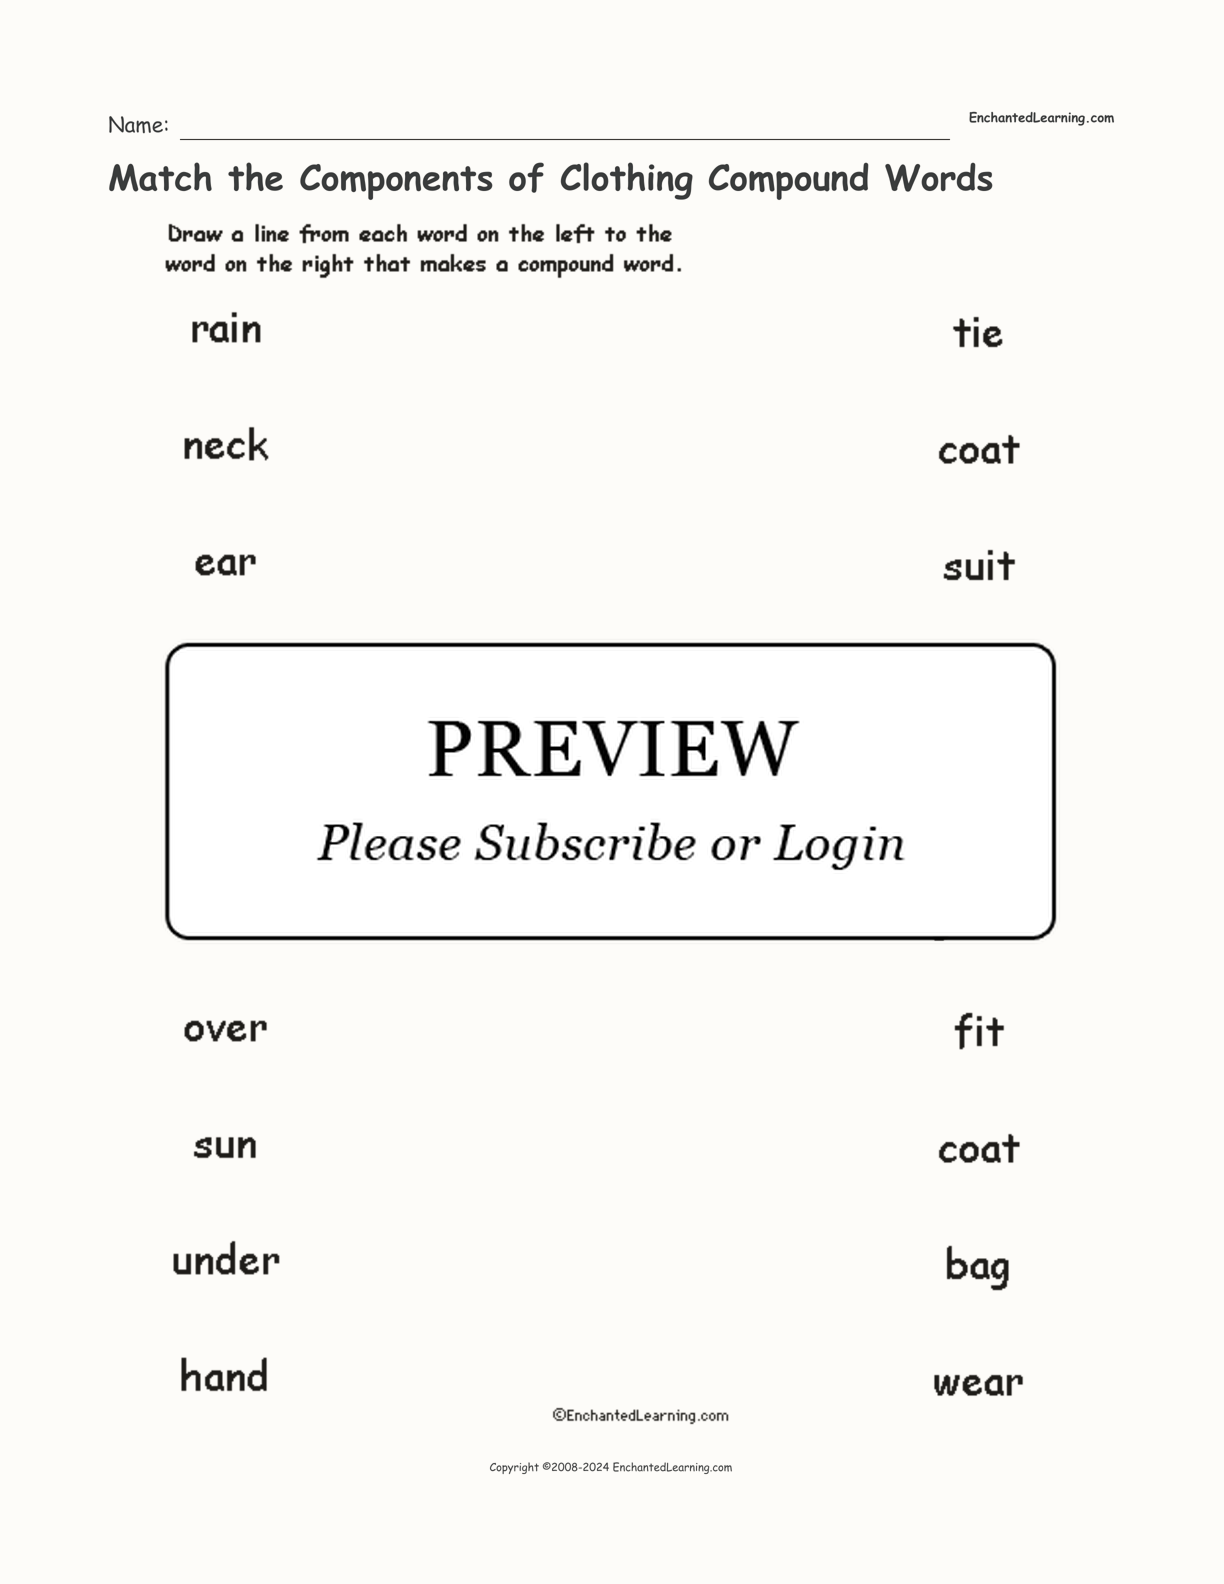 Match the Components of Clothing Compound Words interactive worksheet page 1